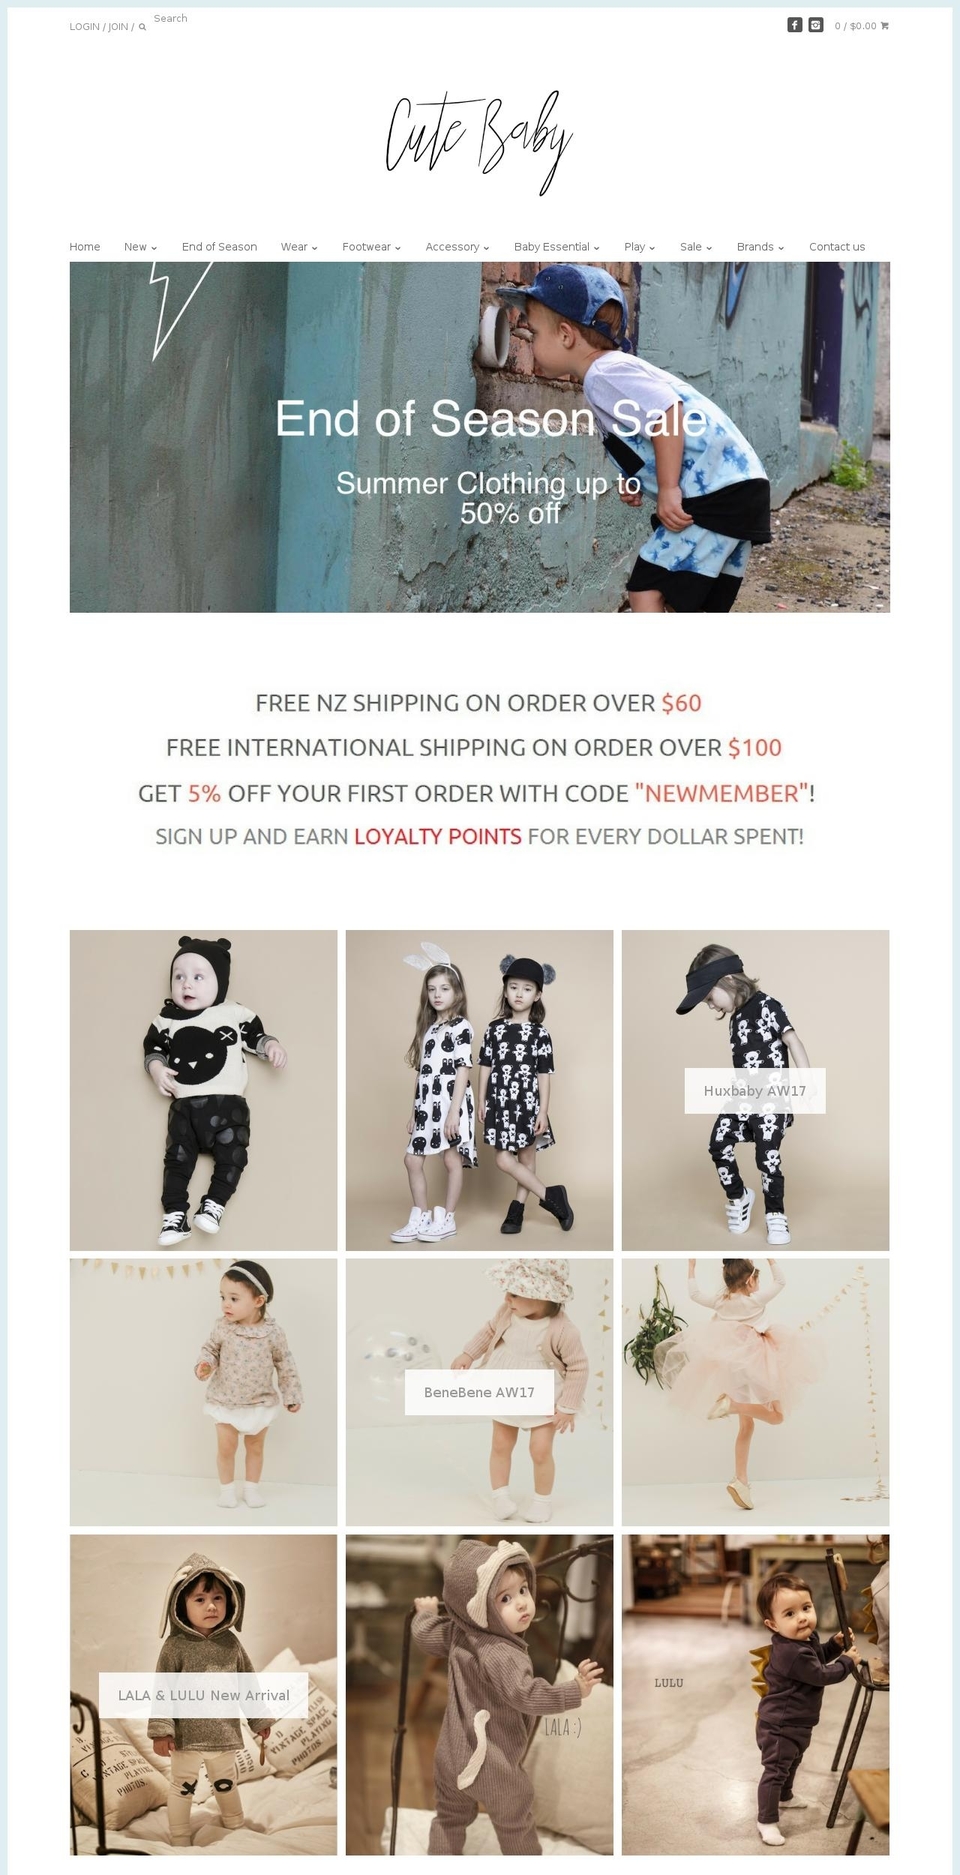 Canopy Shopify theme site example cutebaby.co.nz